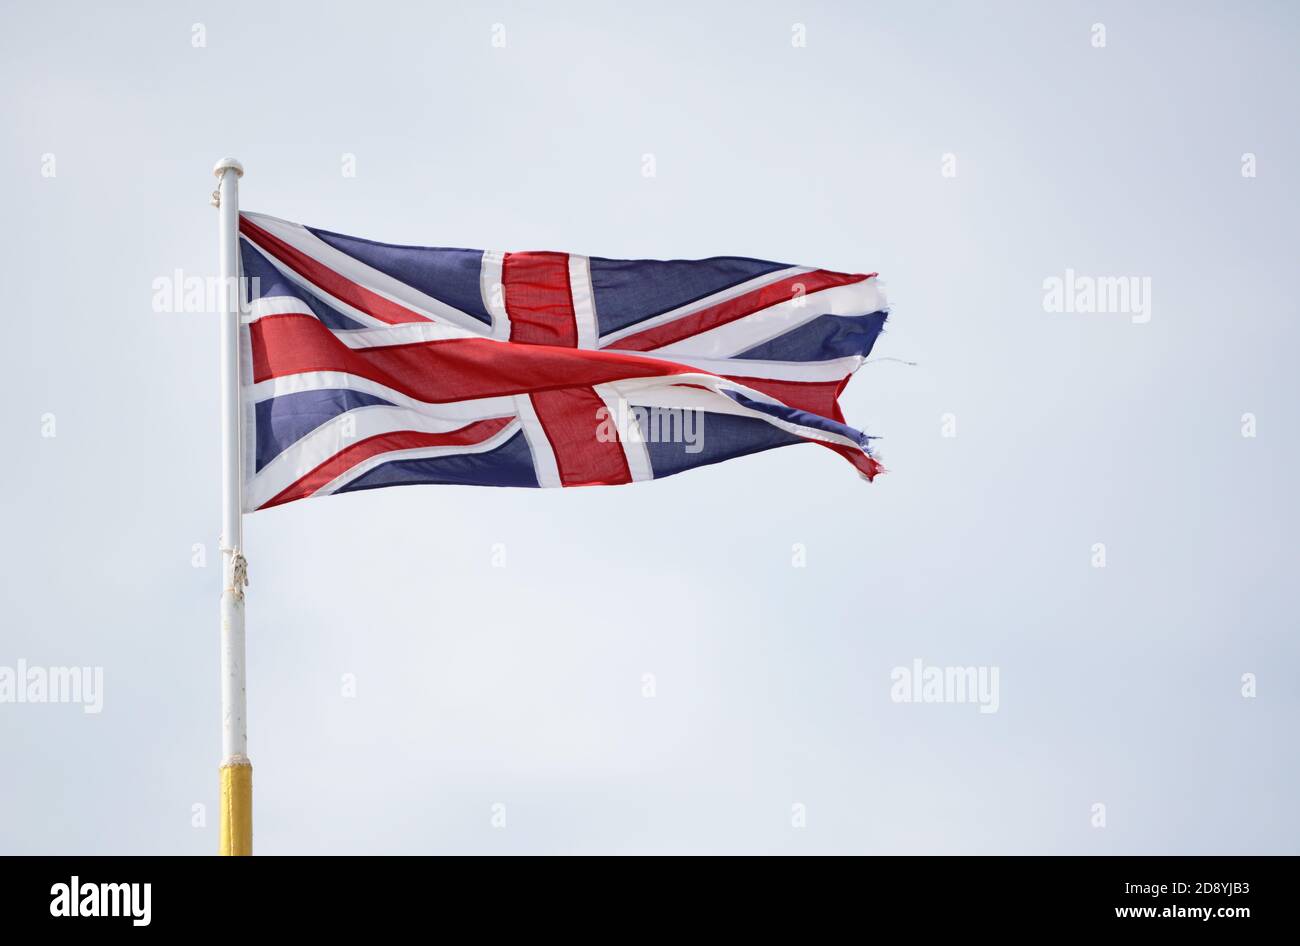 Union Jack flag representing Scotland, Wales, Northern Ireland and England, flies against a light blue sky Stock Photo